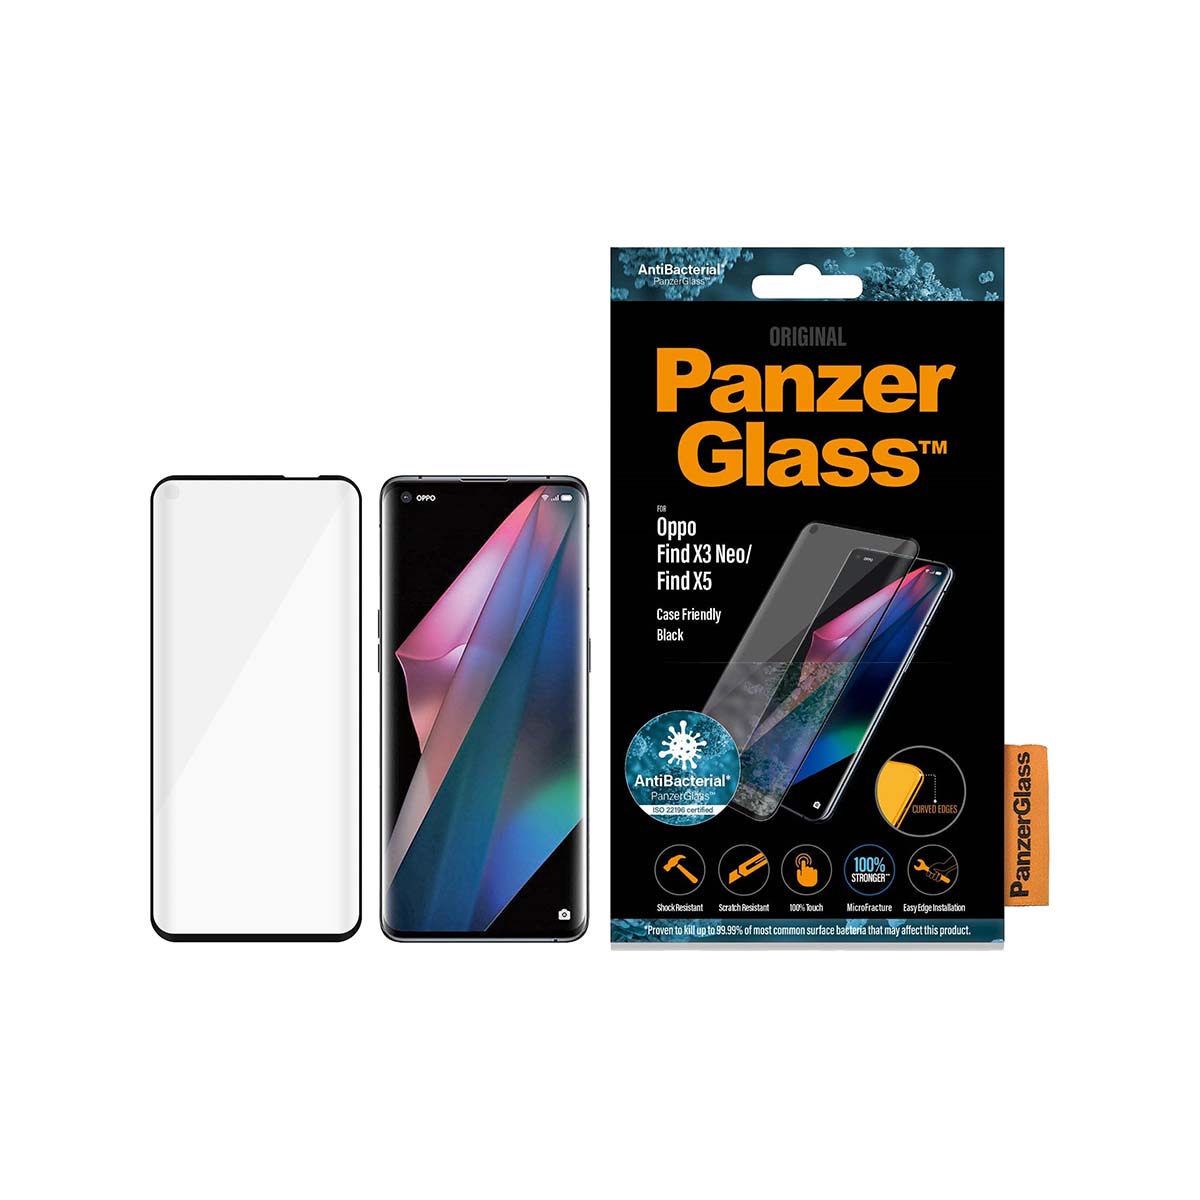 PanzerGlass CaseFriendly AB Screen Protector for Oppo Find X5/X3 Neo - Black